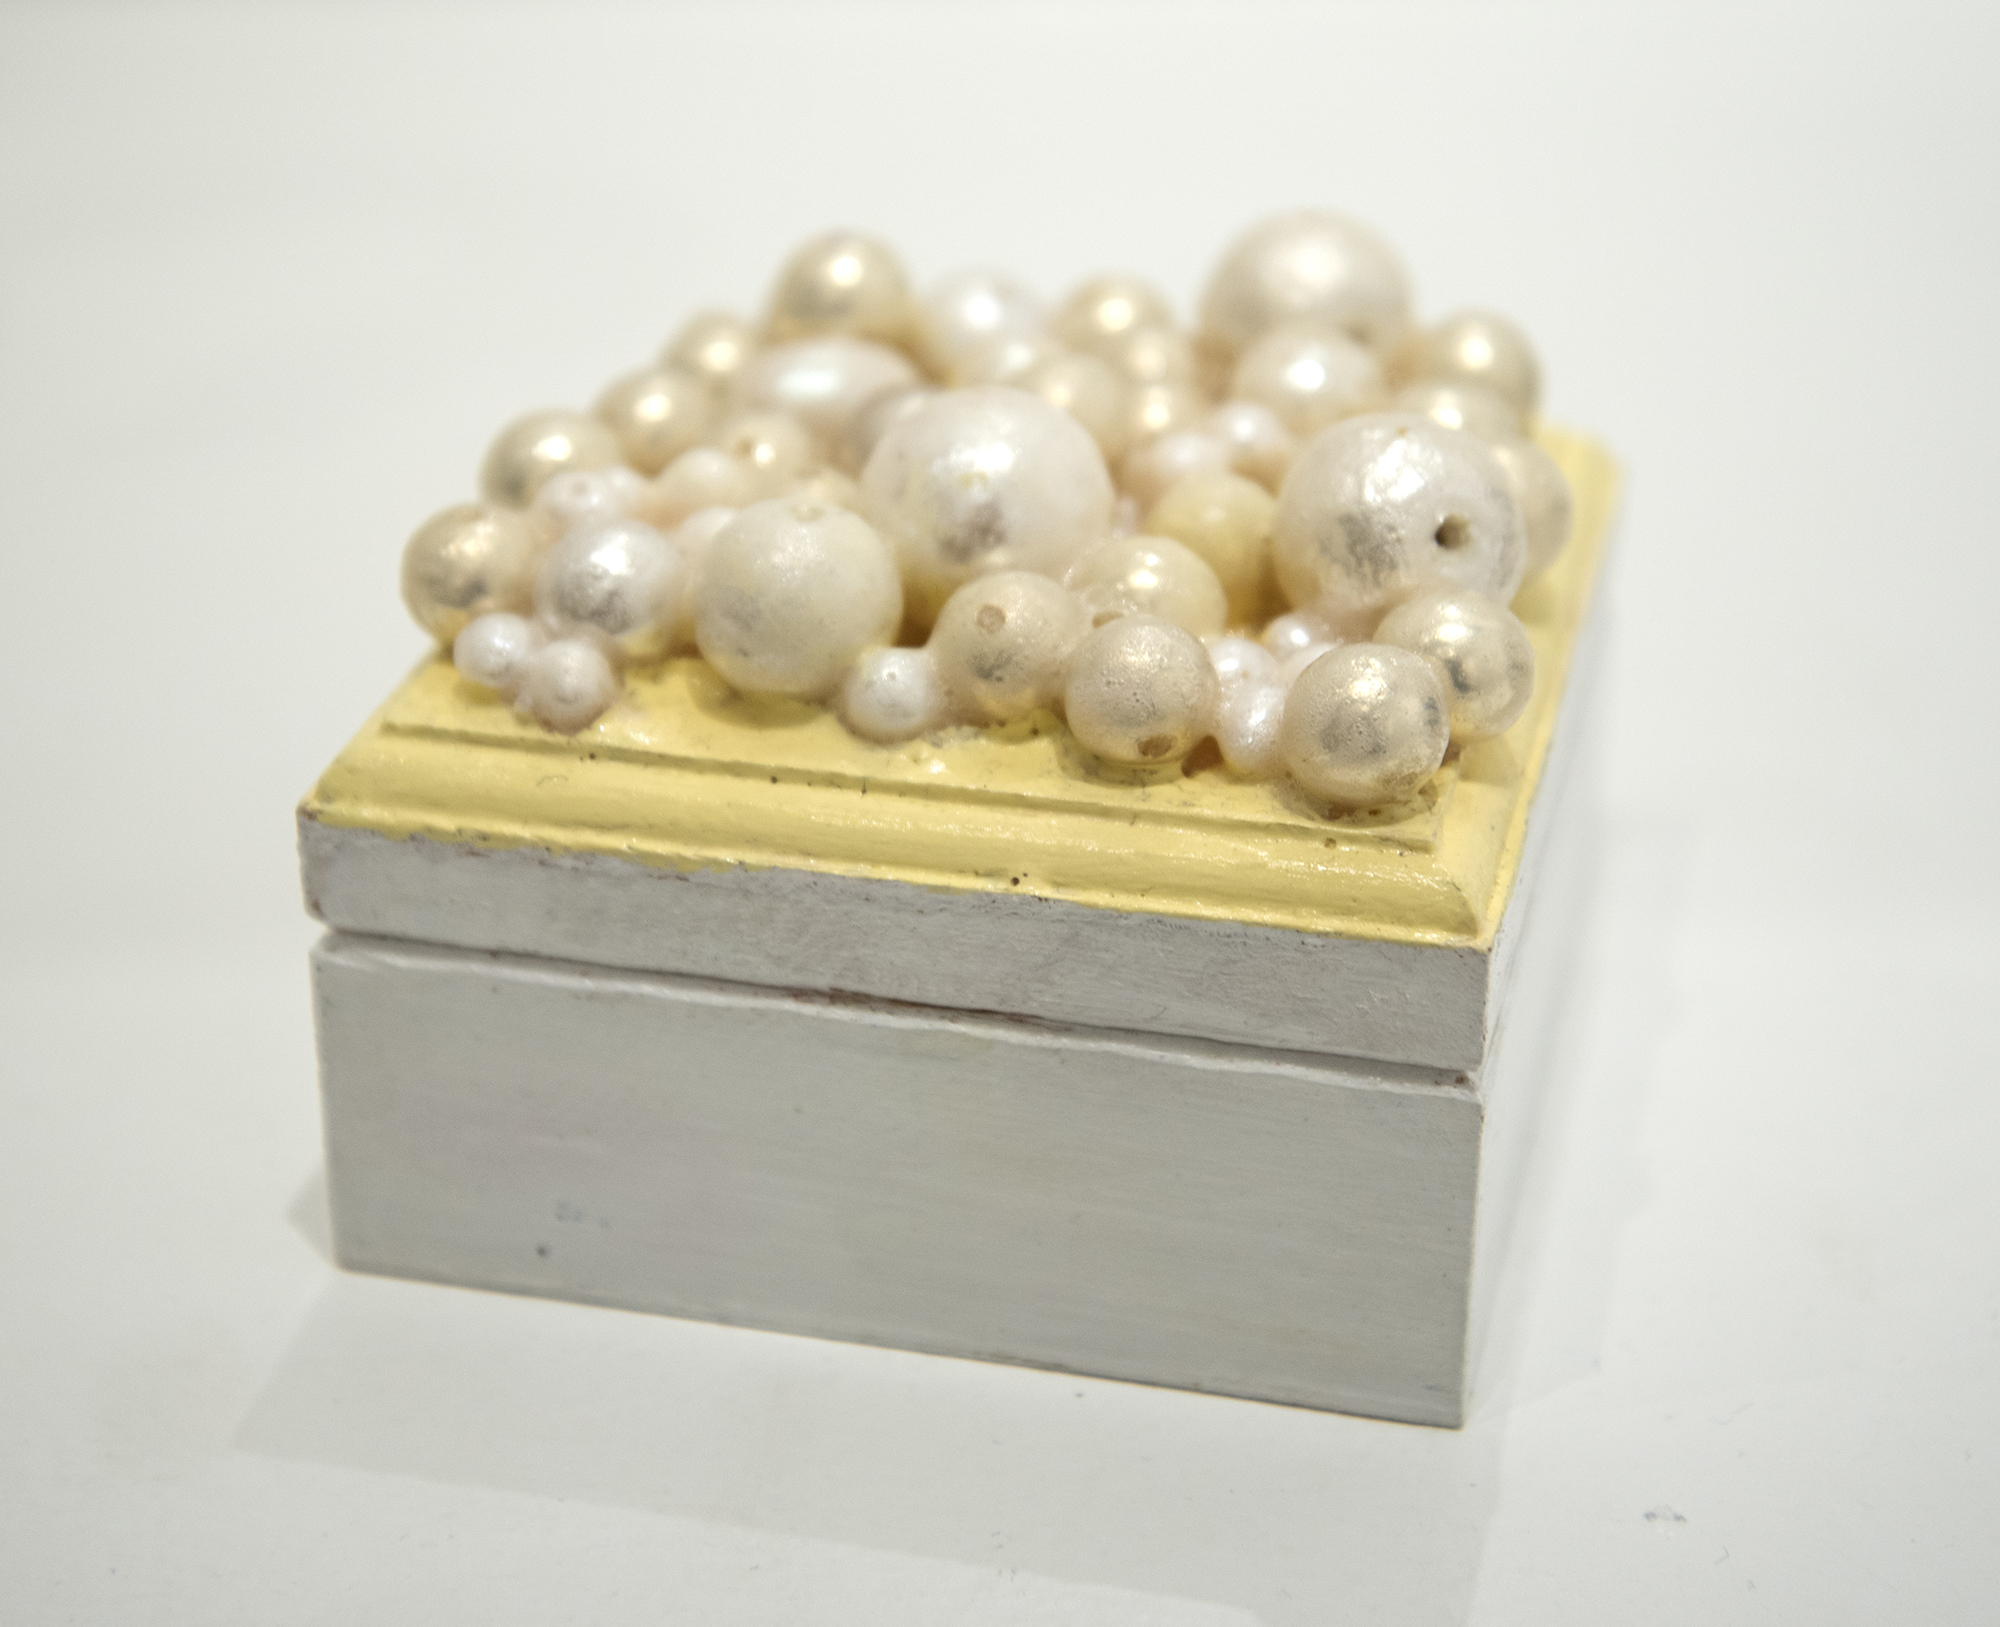 Chandra Phillips. Untitled. Pearls and paint on wooden box. 2019.